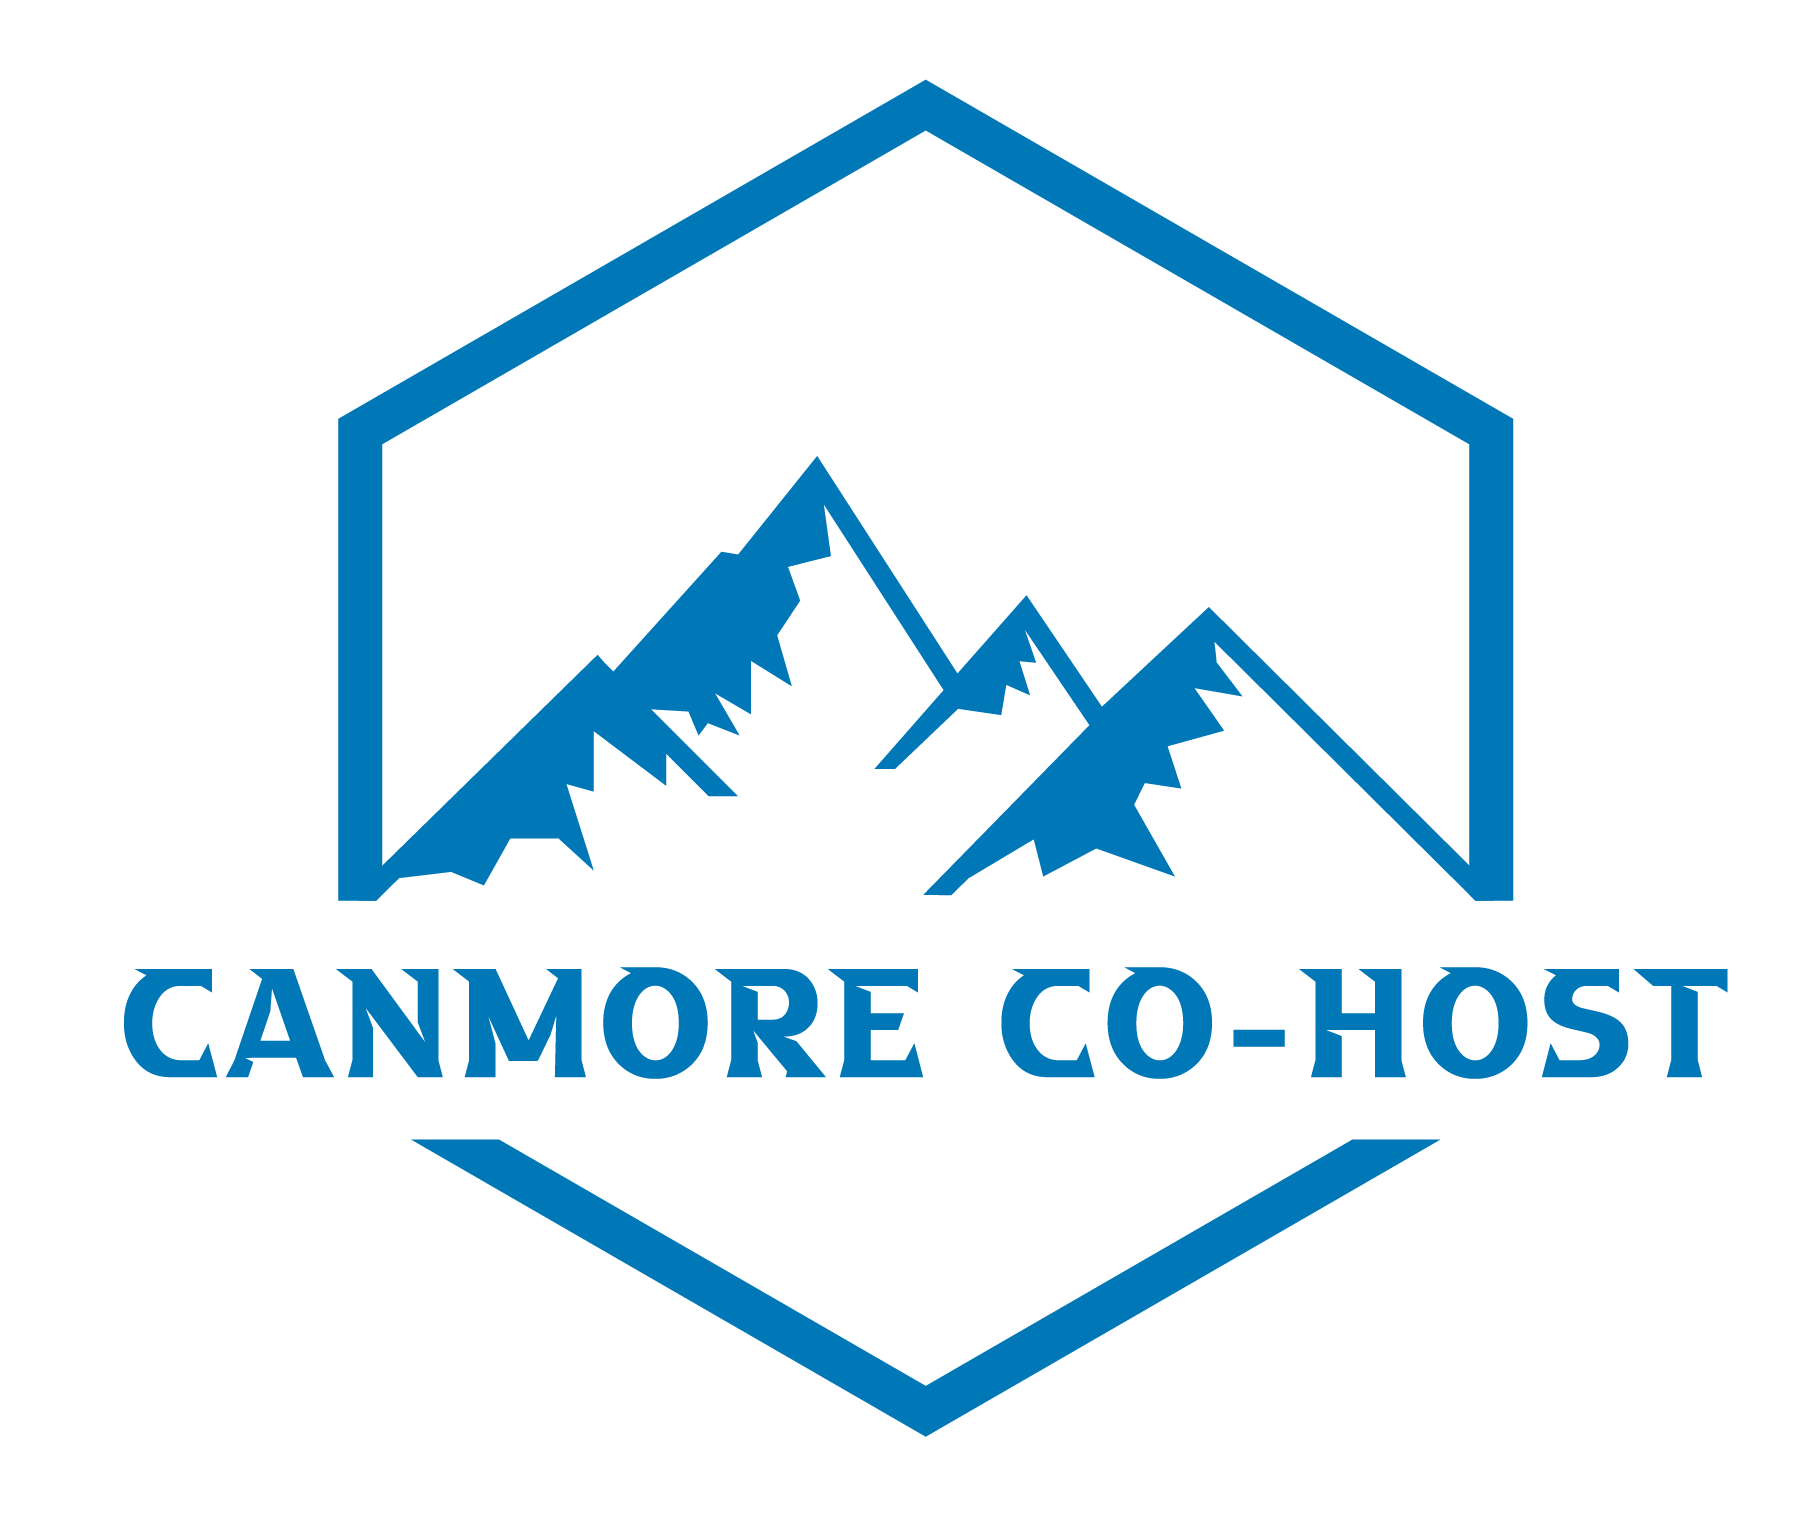 Canmore Co-Host